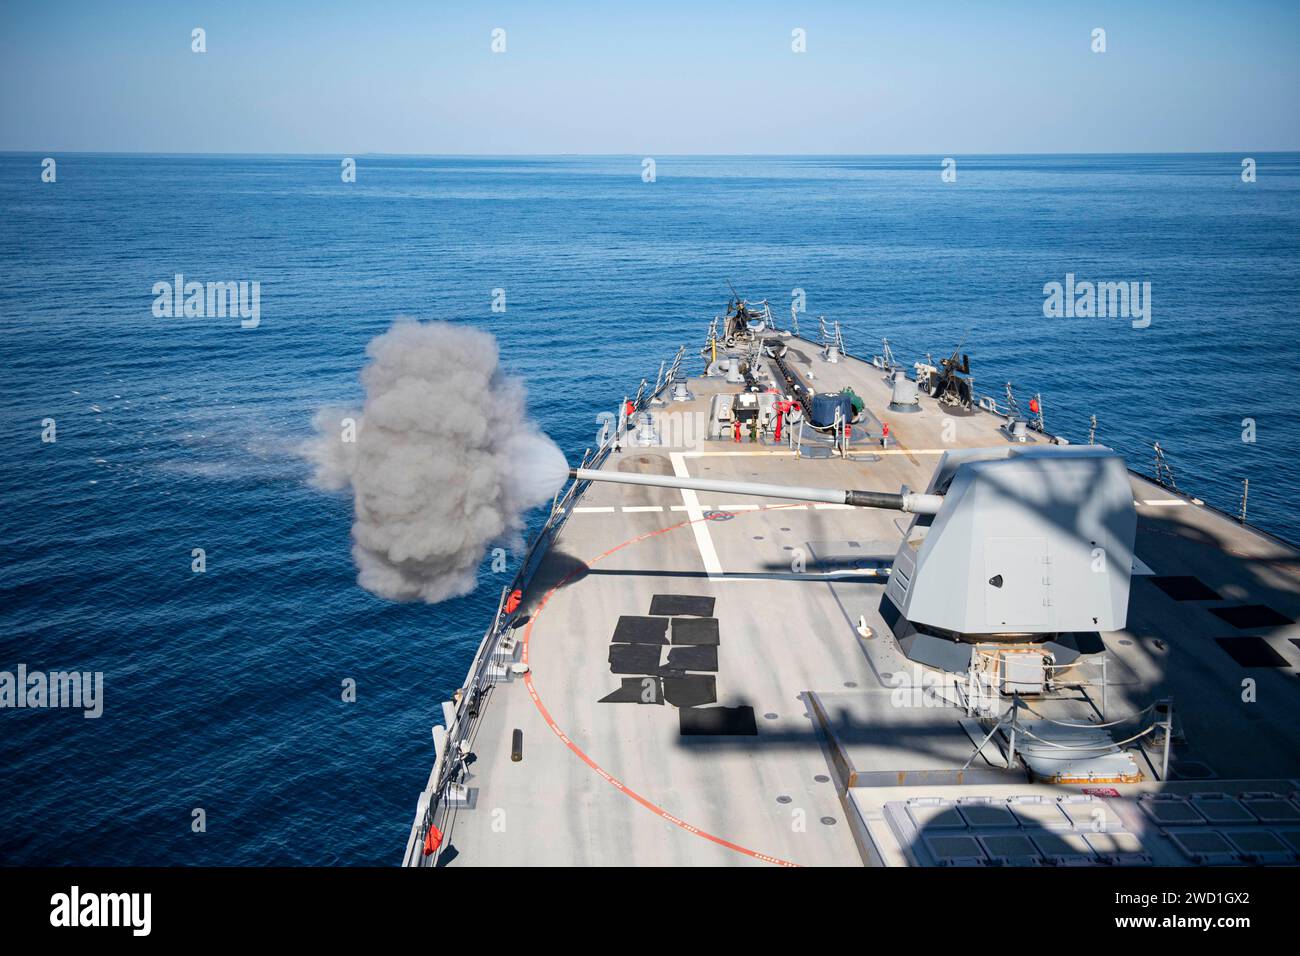 Guided-missile destroyer USS Sterett (DDG 104) fires its Mark 45 5-inch gun in the Gulf of Oman. Stock Photo